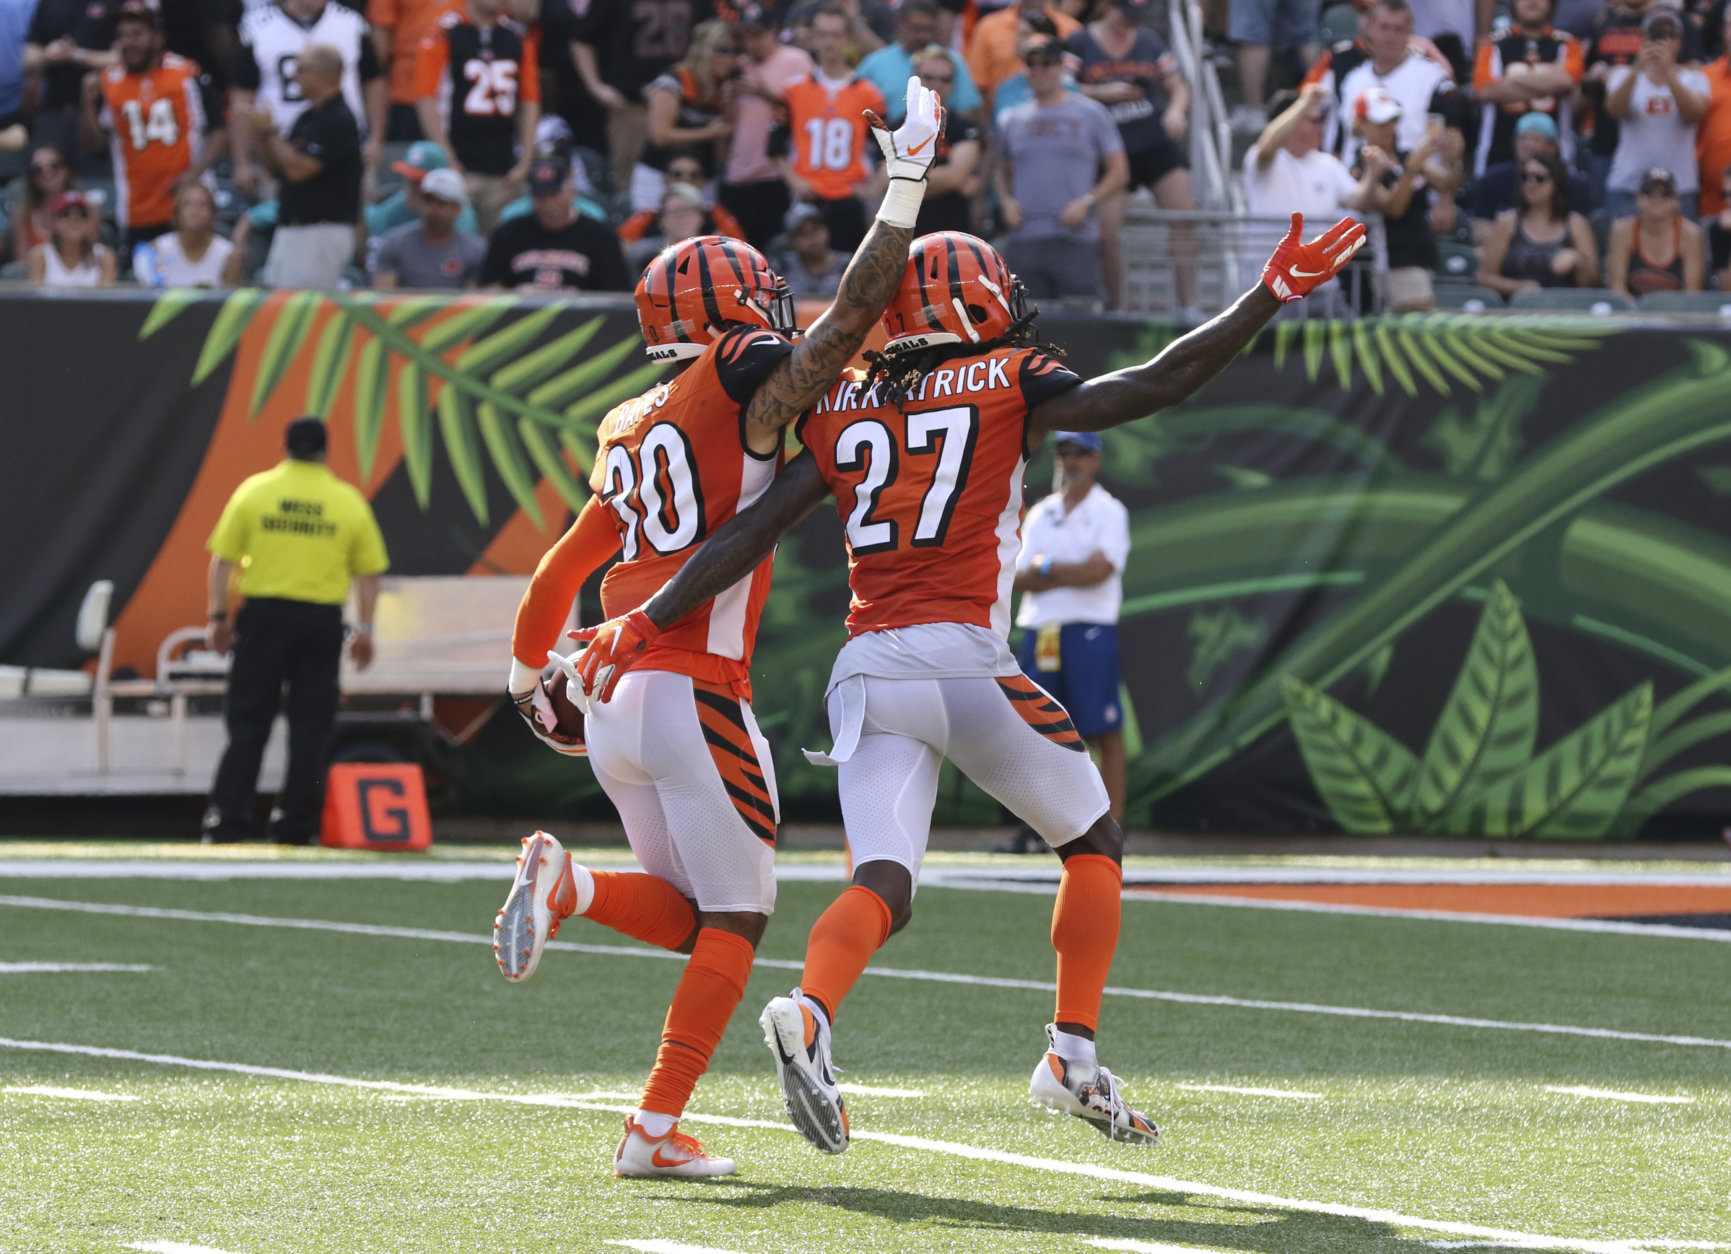 Cincinnati Bengals free safety Jessie Bates (30) celebrates an interception with cornerback Dre Kirkpatrick (27) during the second half of an NFL football game against the Miami Dolphins in Cincinnati, Sunday, Oct. 7, 2018. The Bengals defeated the Dolphins 27-17. (AP Photo/Gary Landers)